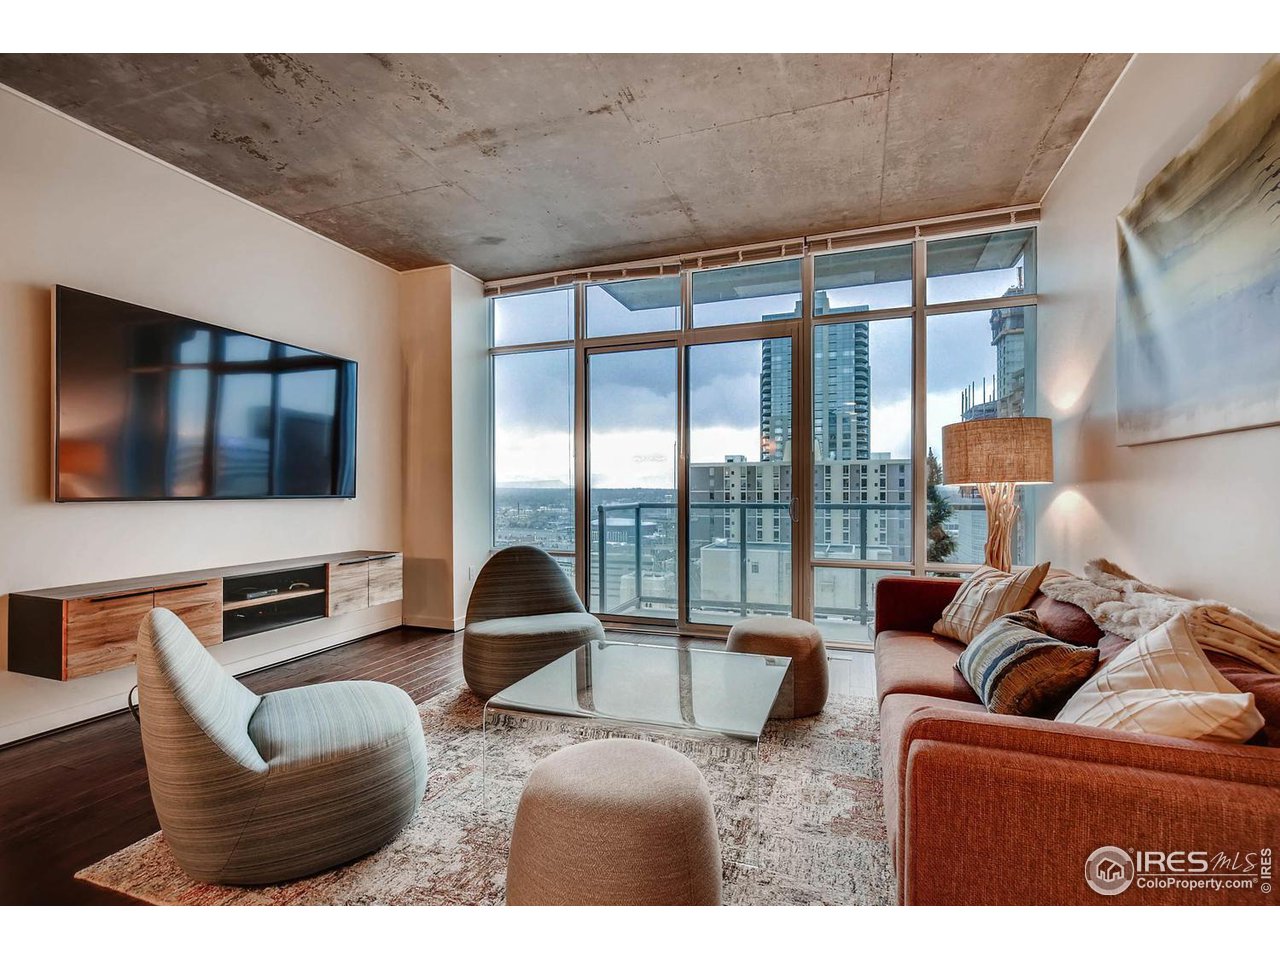 Living room with amazing Downtown and mountain views through the floor to ceiling windows.